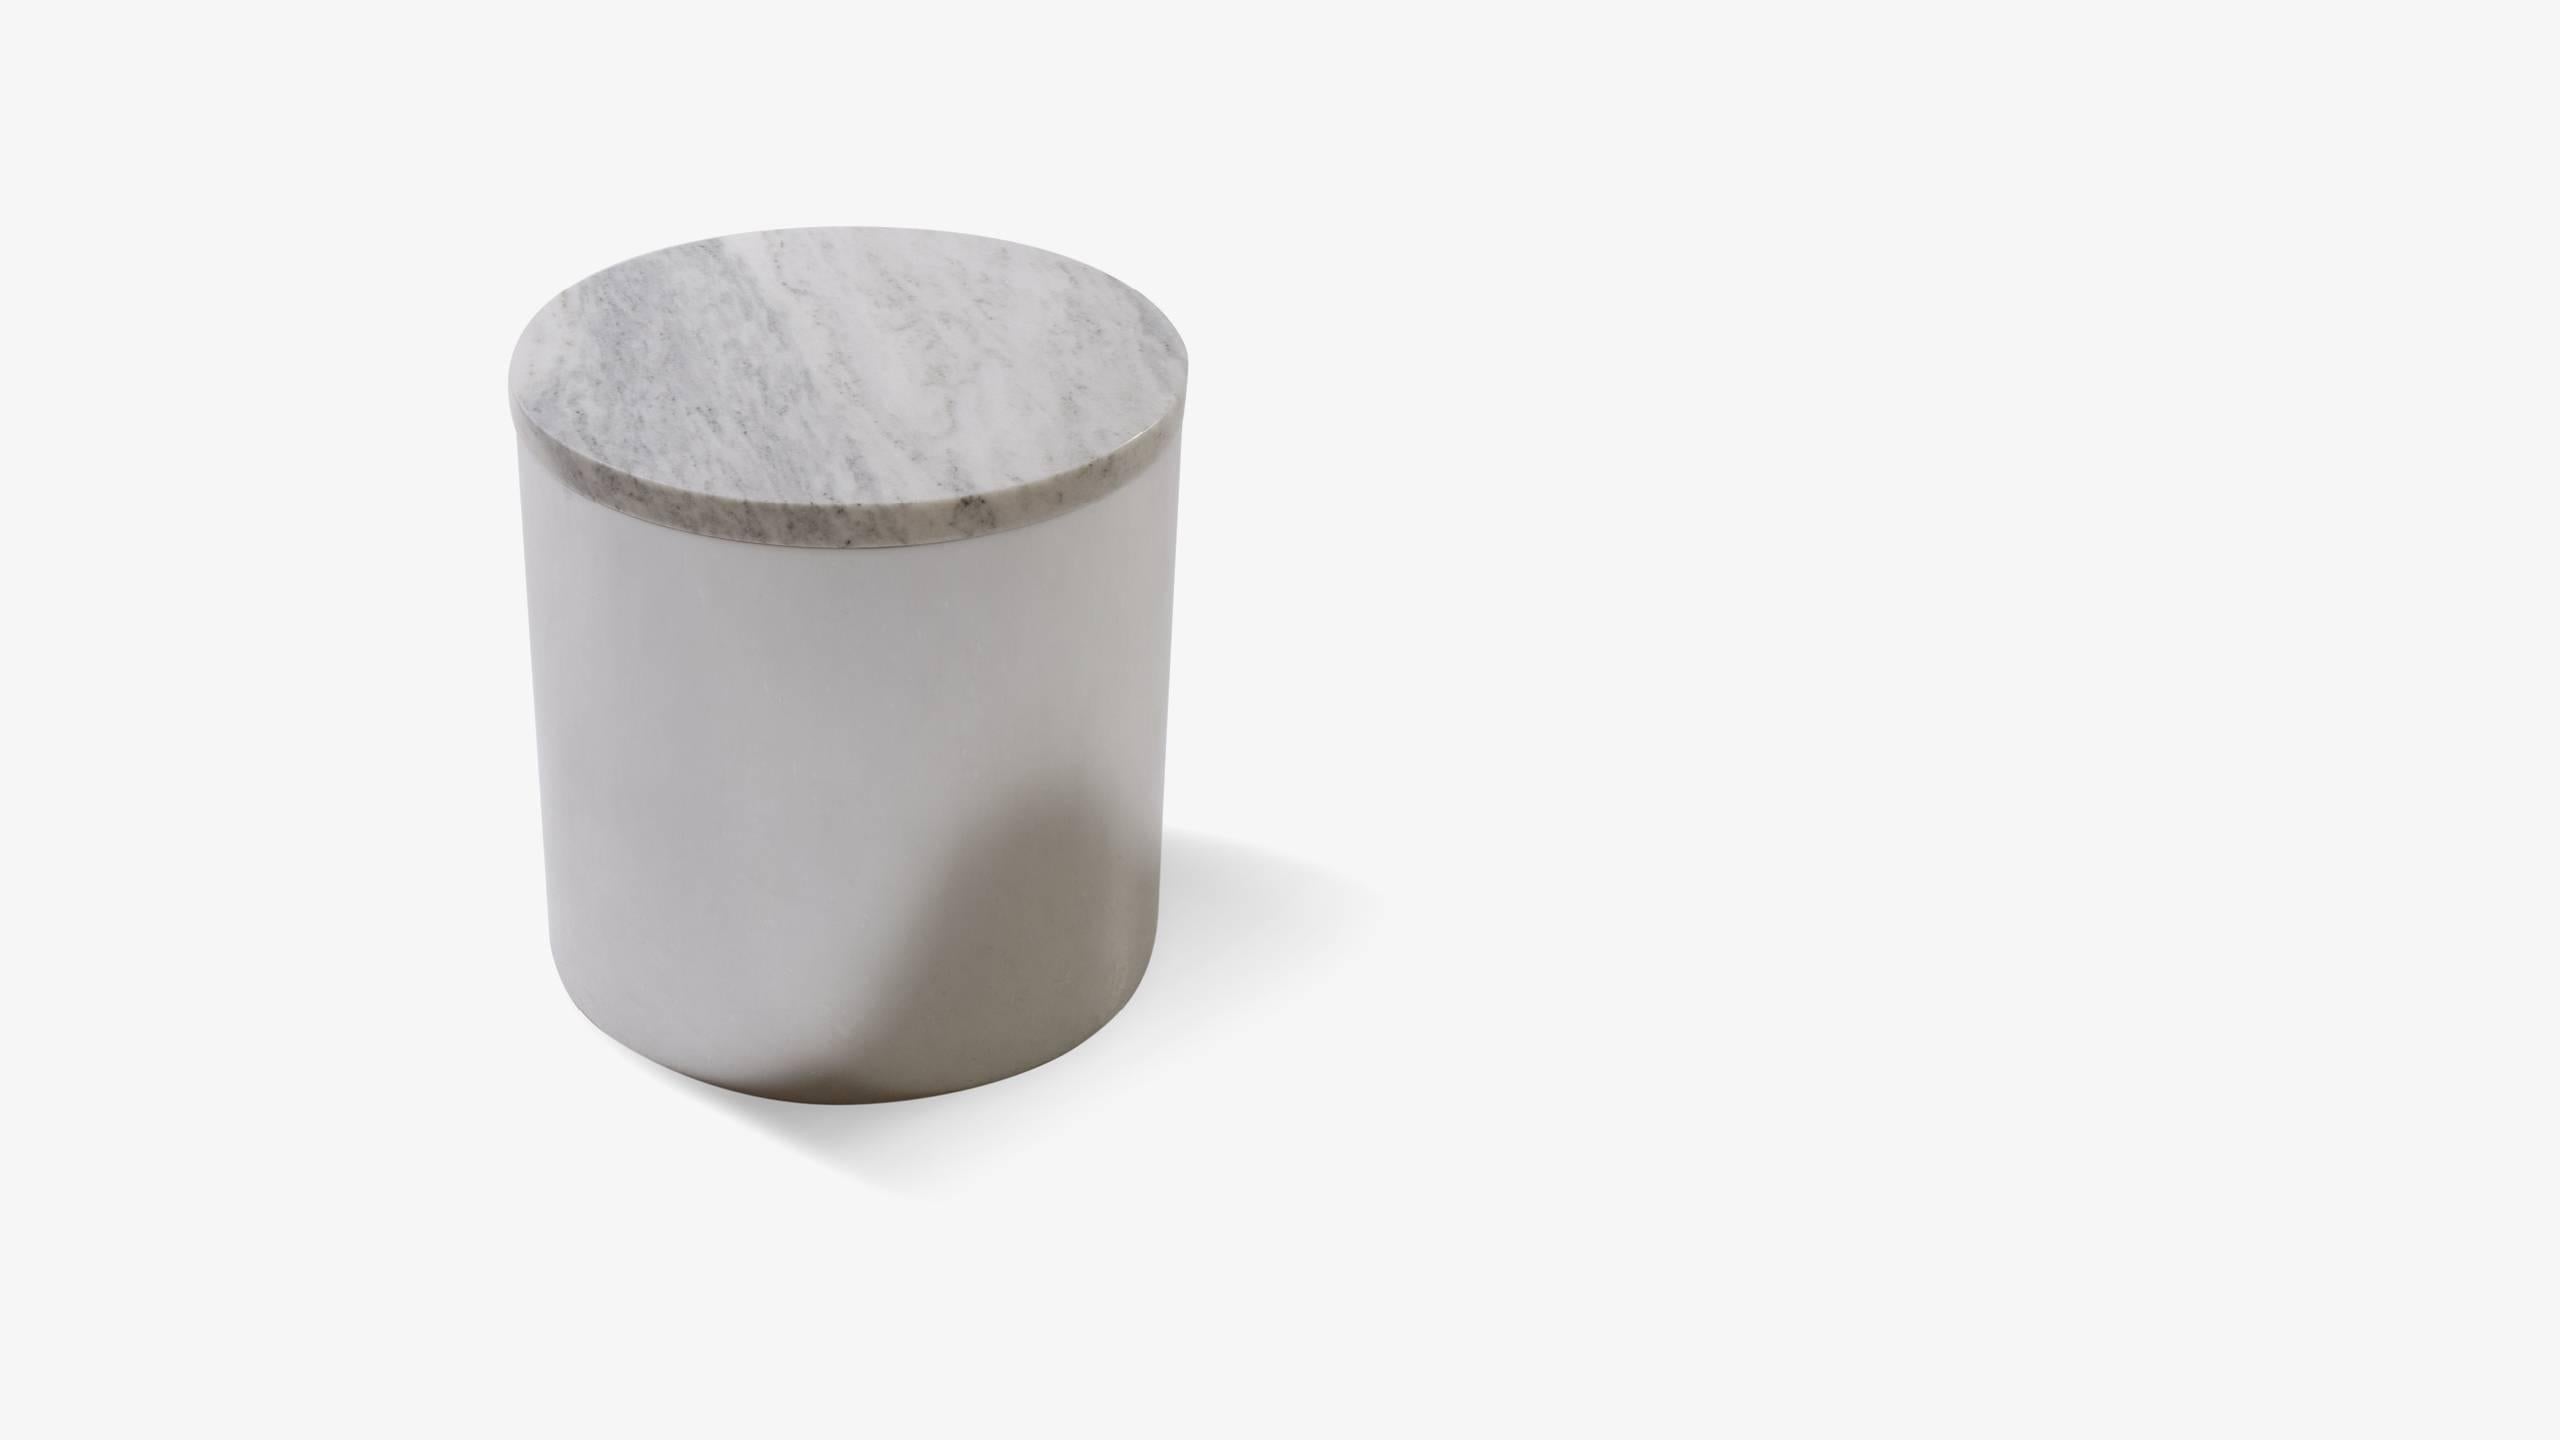 A delicately proportioned clean-lined accent table designed by Paul Mayen for Habitat. Mayen's sense of materiality was spectacular, evident in this Minimalist piece. A simple round cut piece of carrara marble fits seamlessly into a polished steel